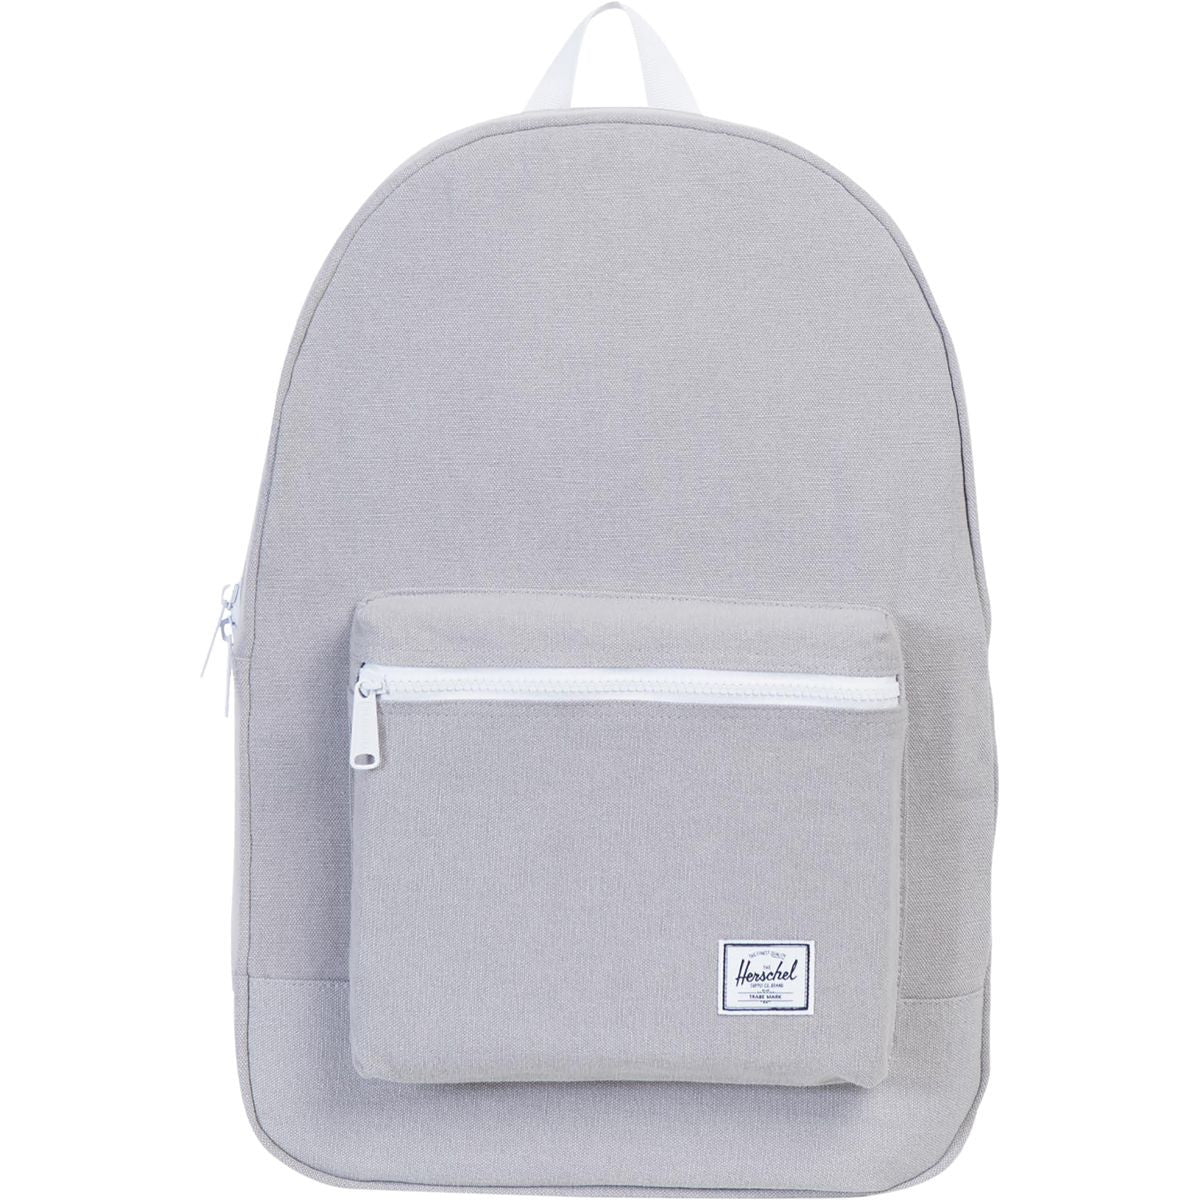 Herschel Supply Co. - Packable Daypack, Grey Canvas - The Giant Peach